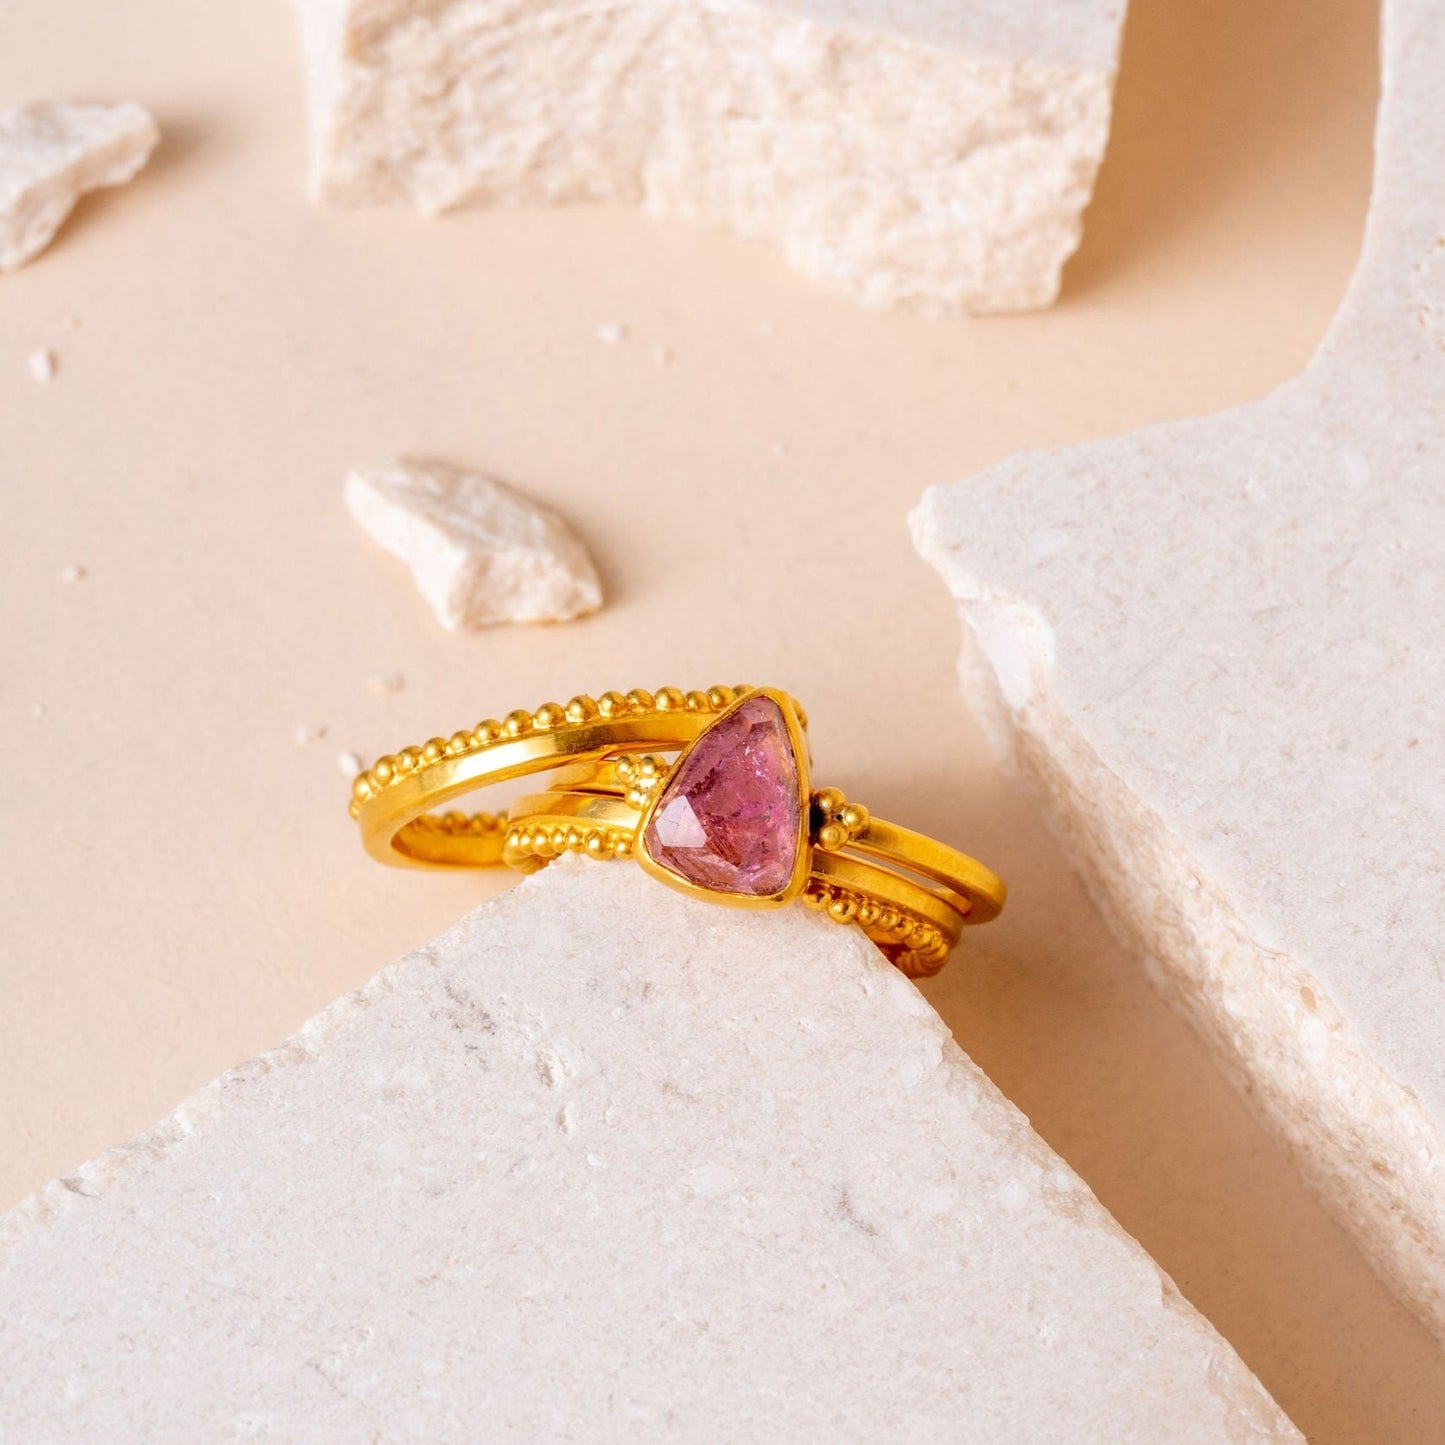 A collection of gold rings, one adorned with a lovely pink tourmaline gem and delicate granulation showing exquisite craftsmanship.